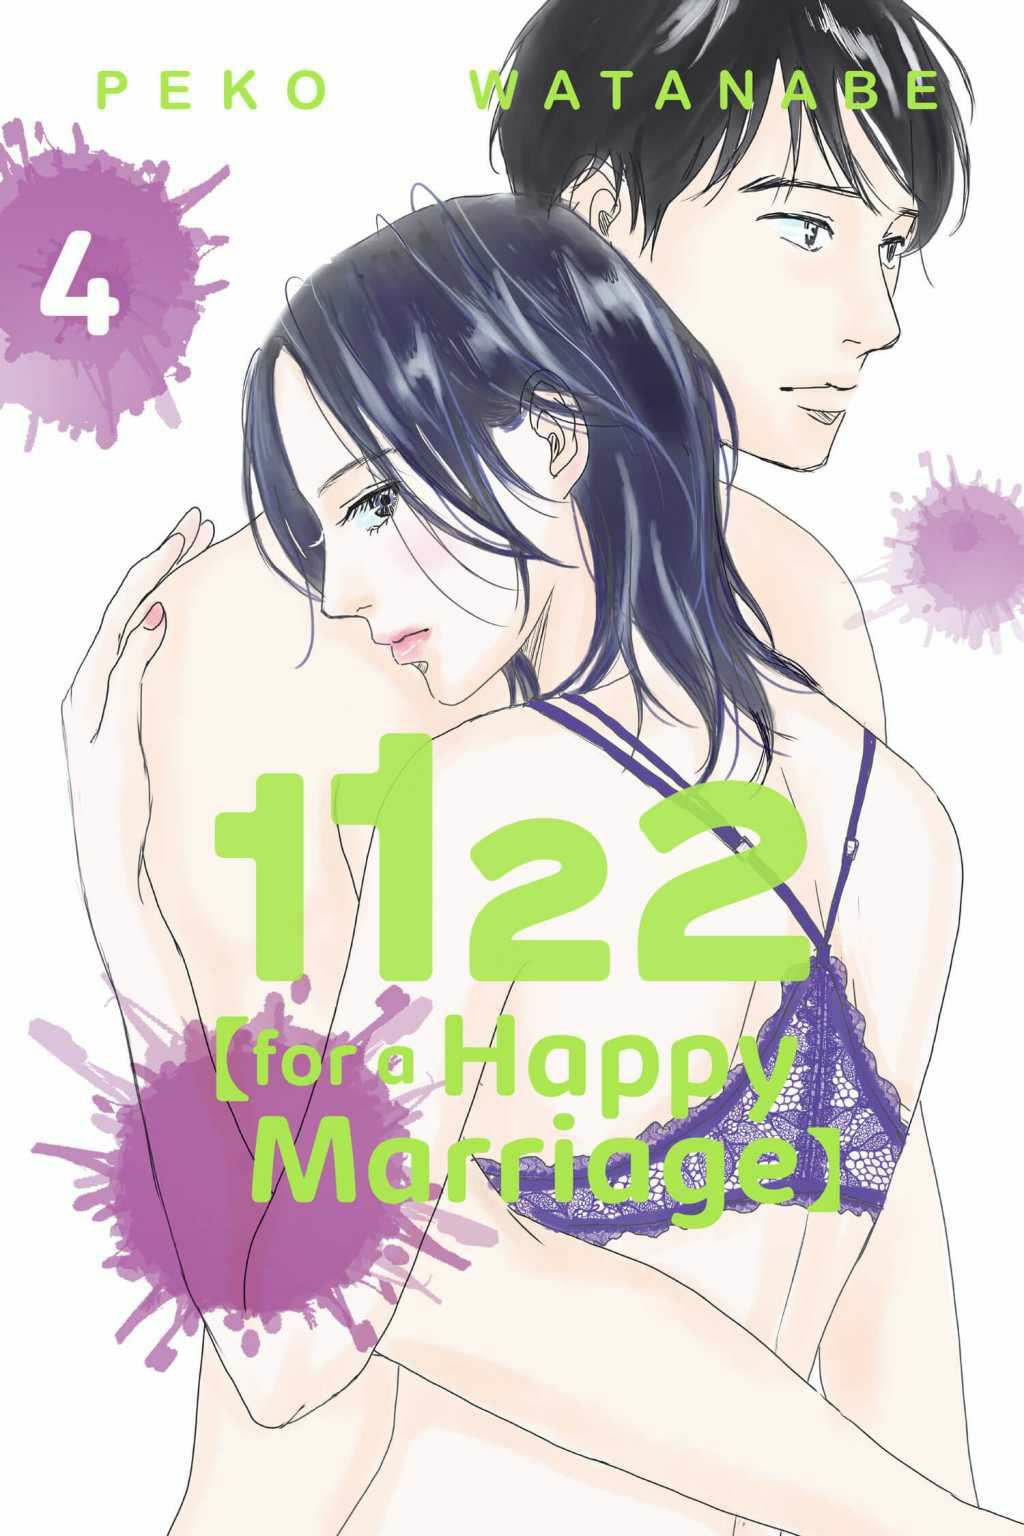 1122 (For a Happy Marriage)